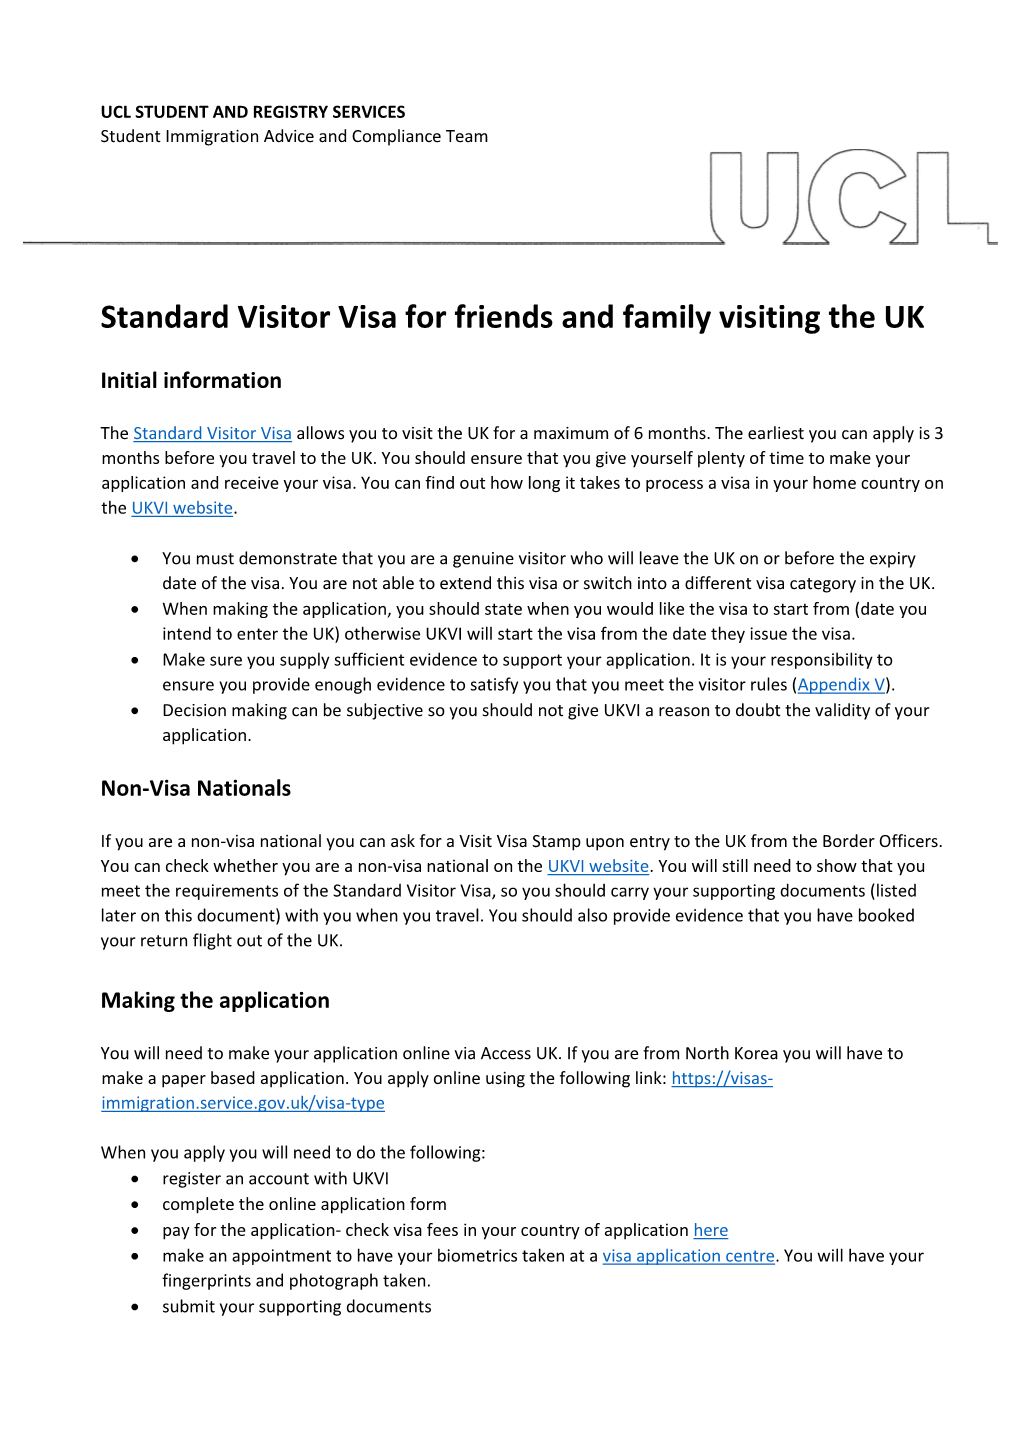 Standard Visitor Visa for Friends and Family Visiting the UK